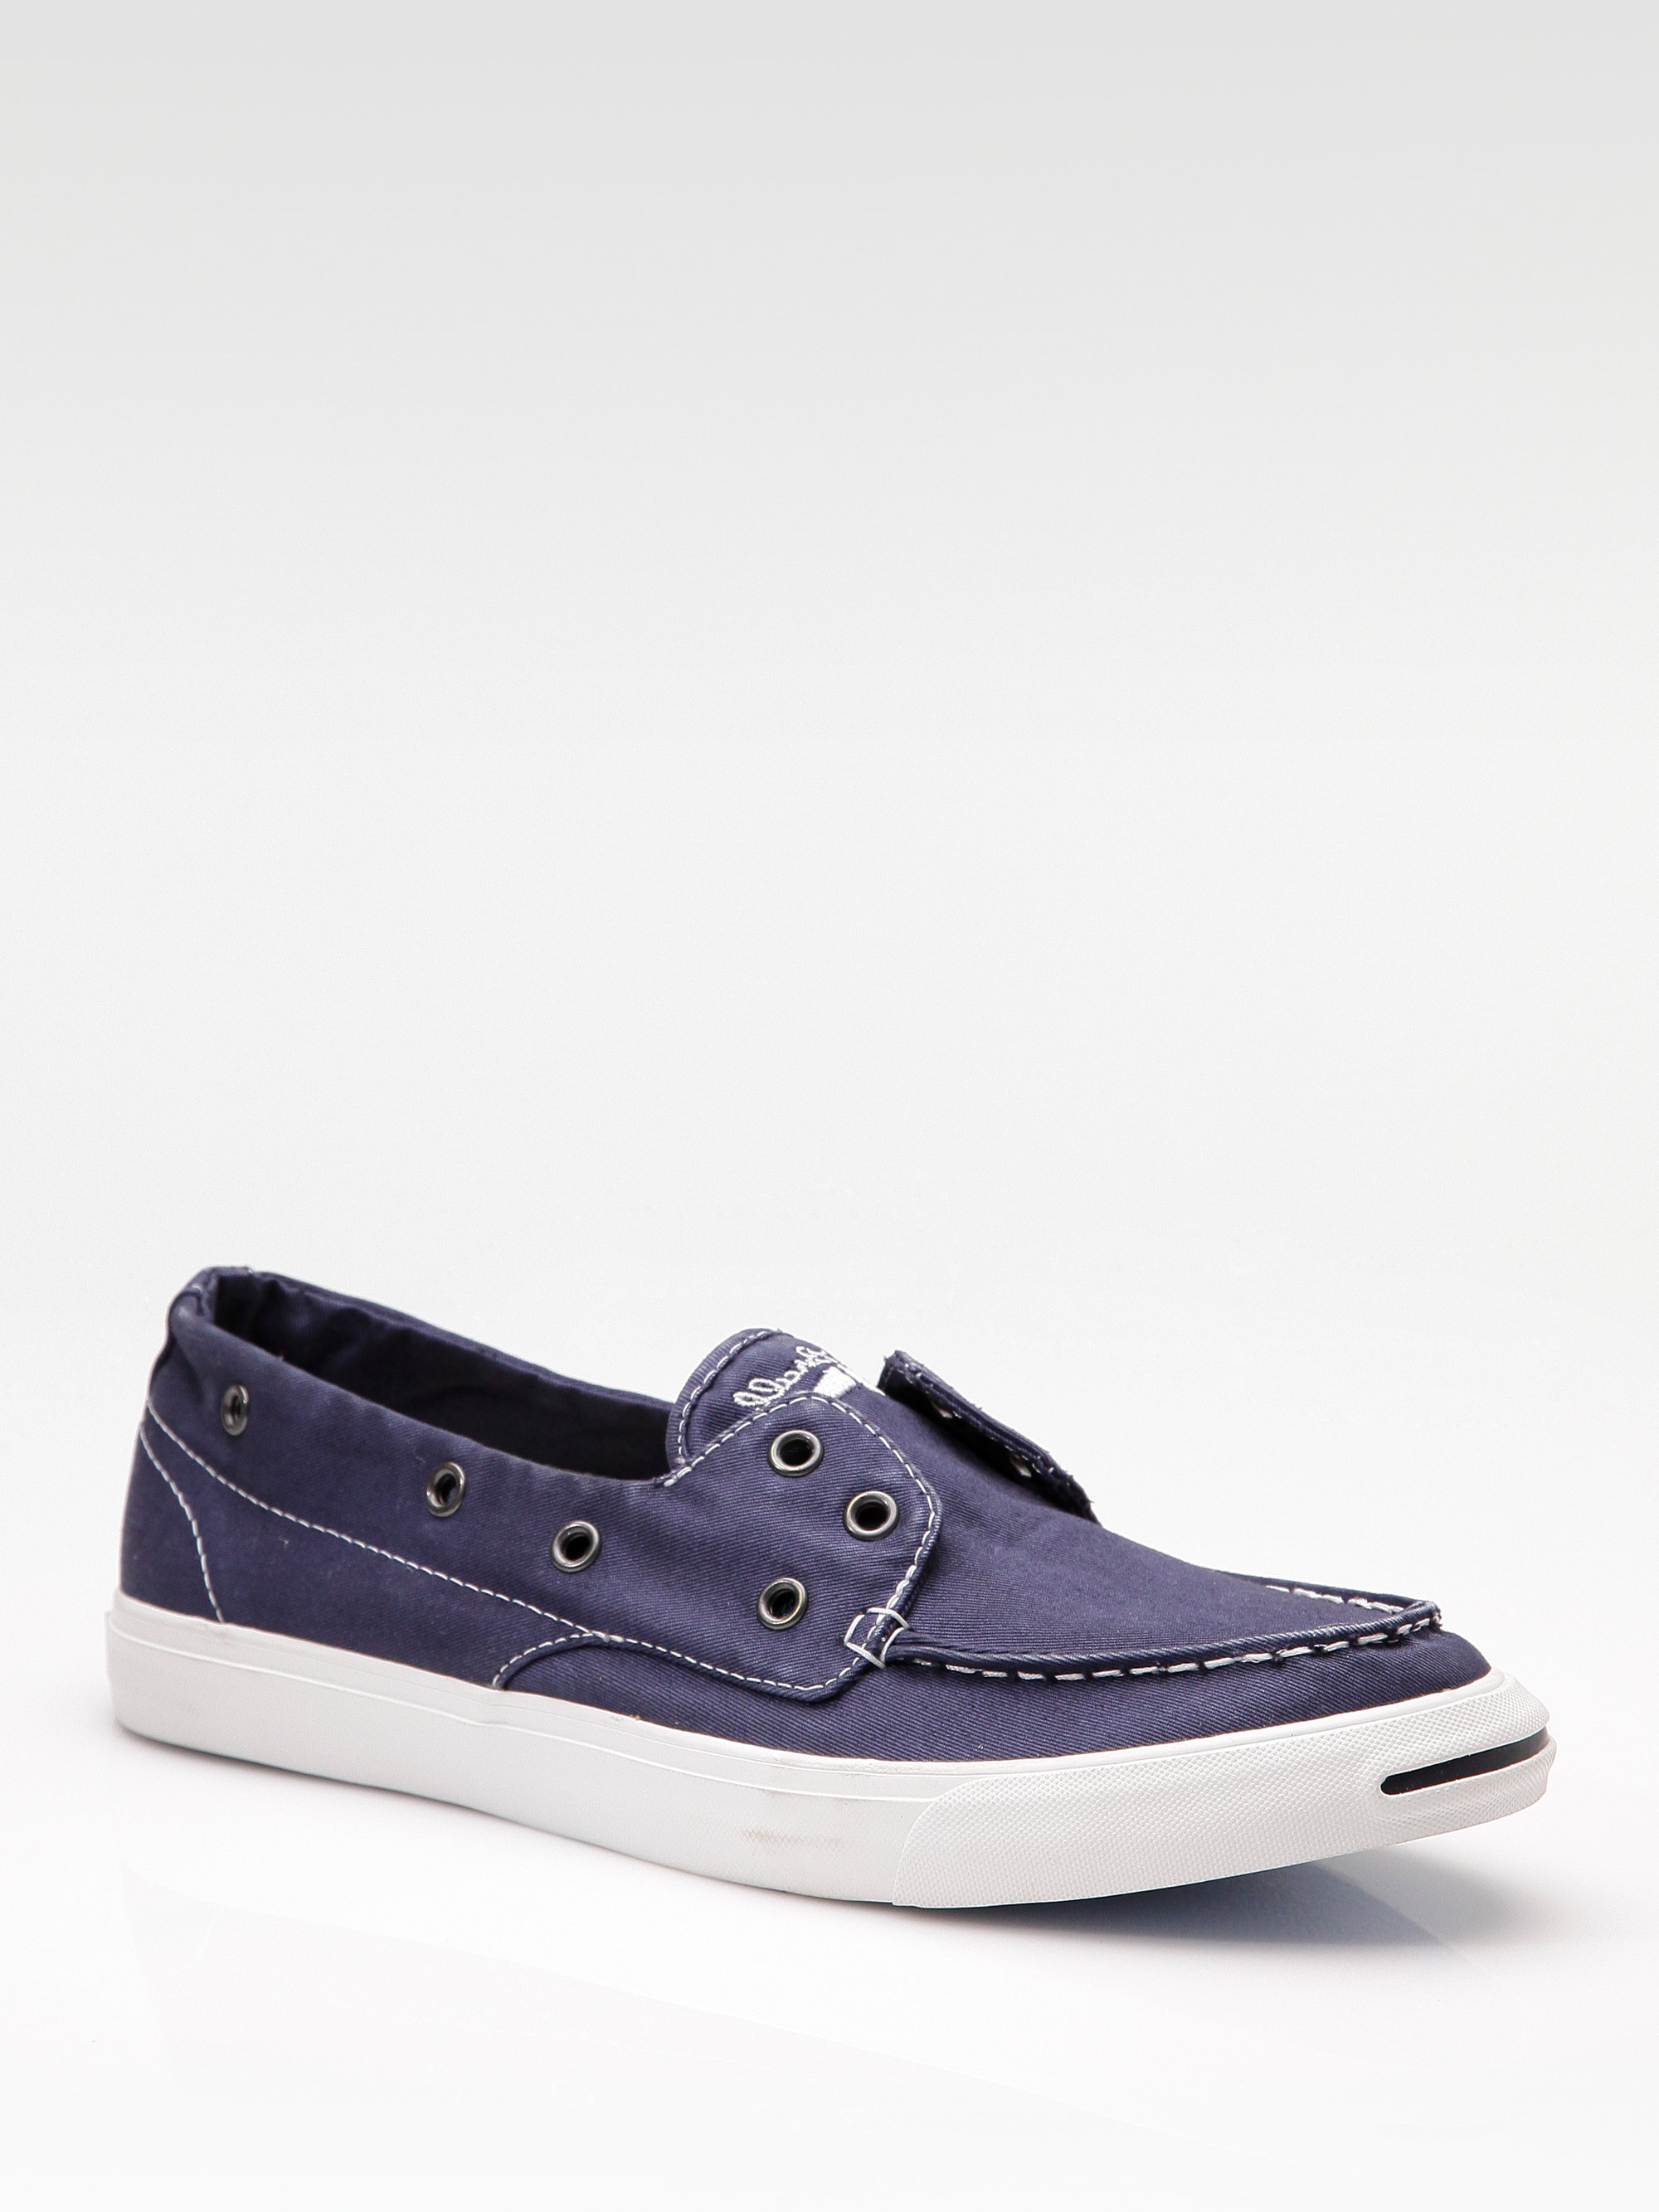 converse jack purcell boat shoe